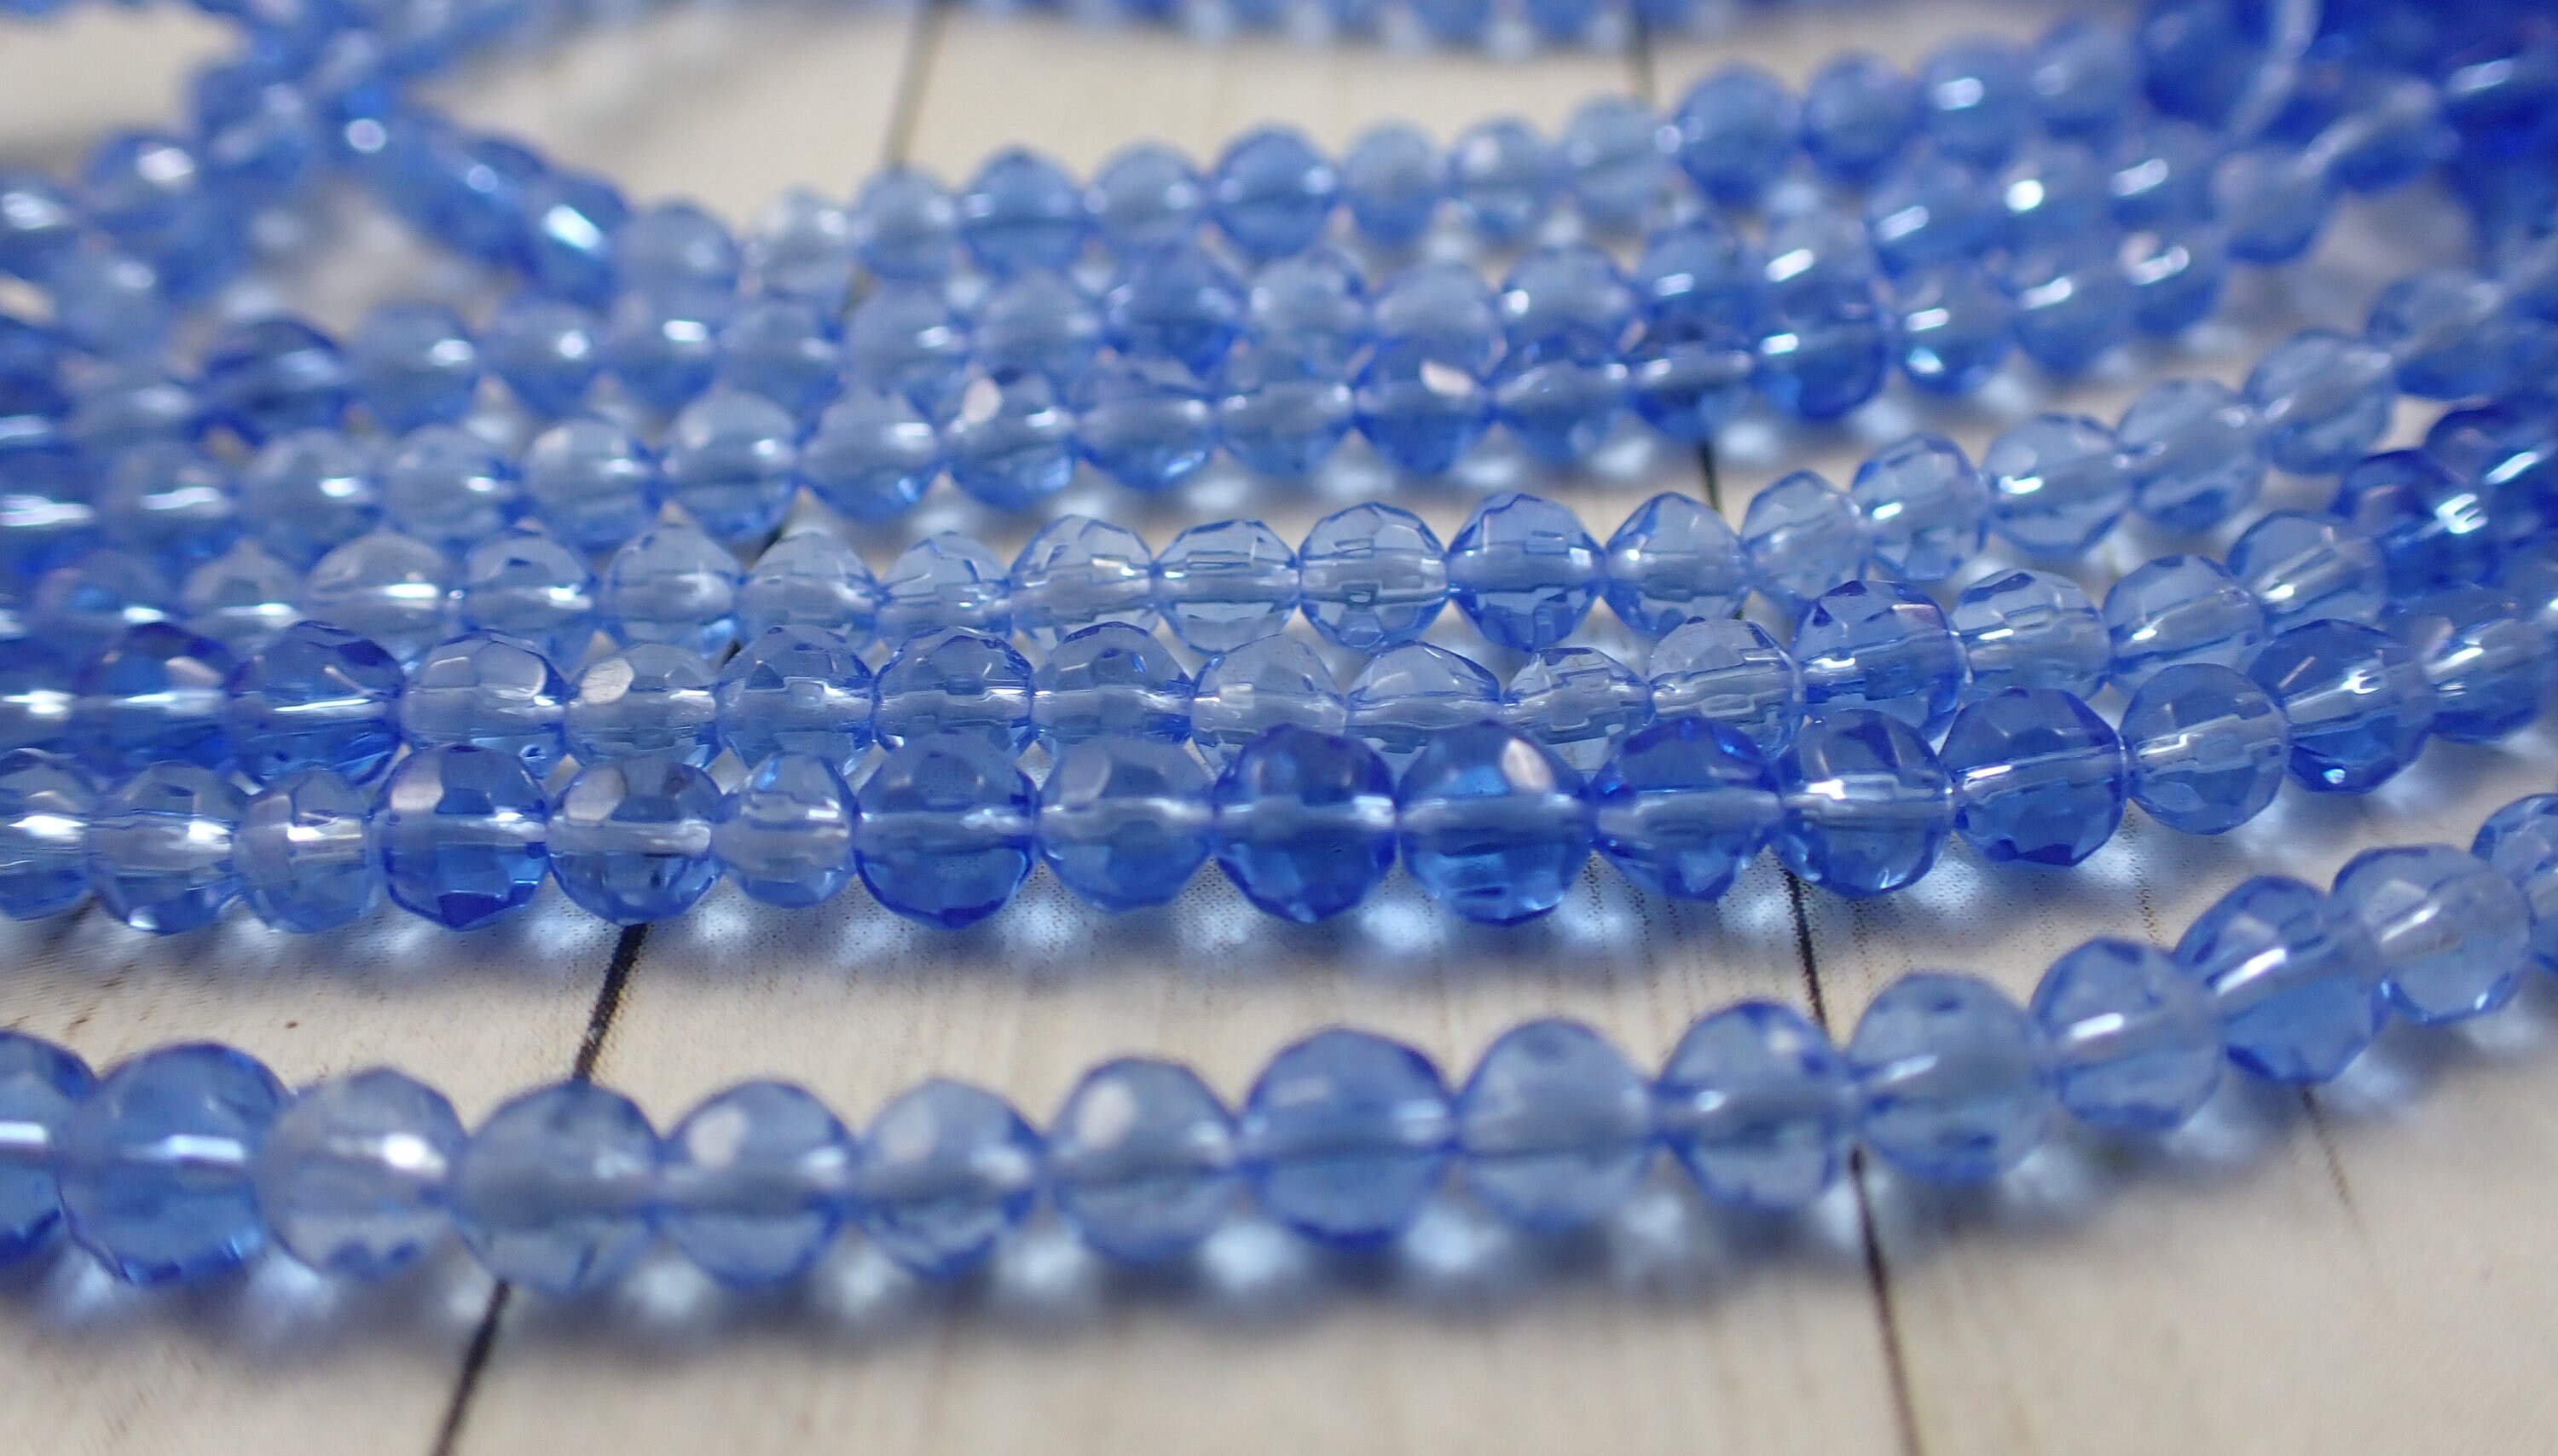 4mm Round Glass Beads - Light Blue Marble - 120 Beads